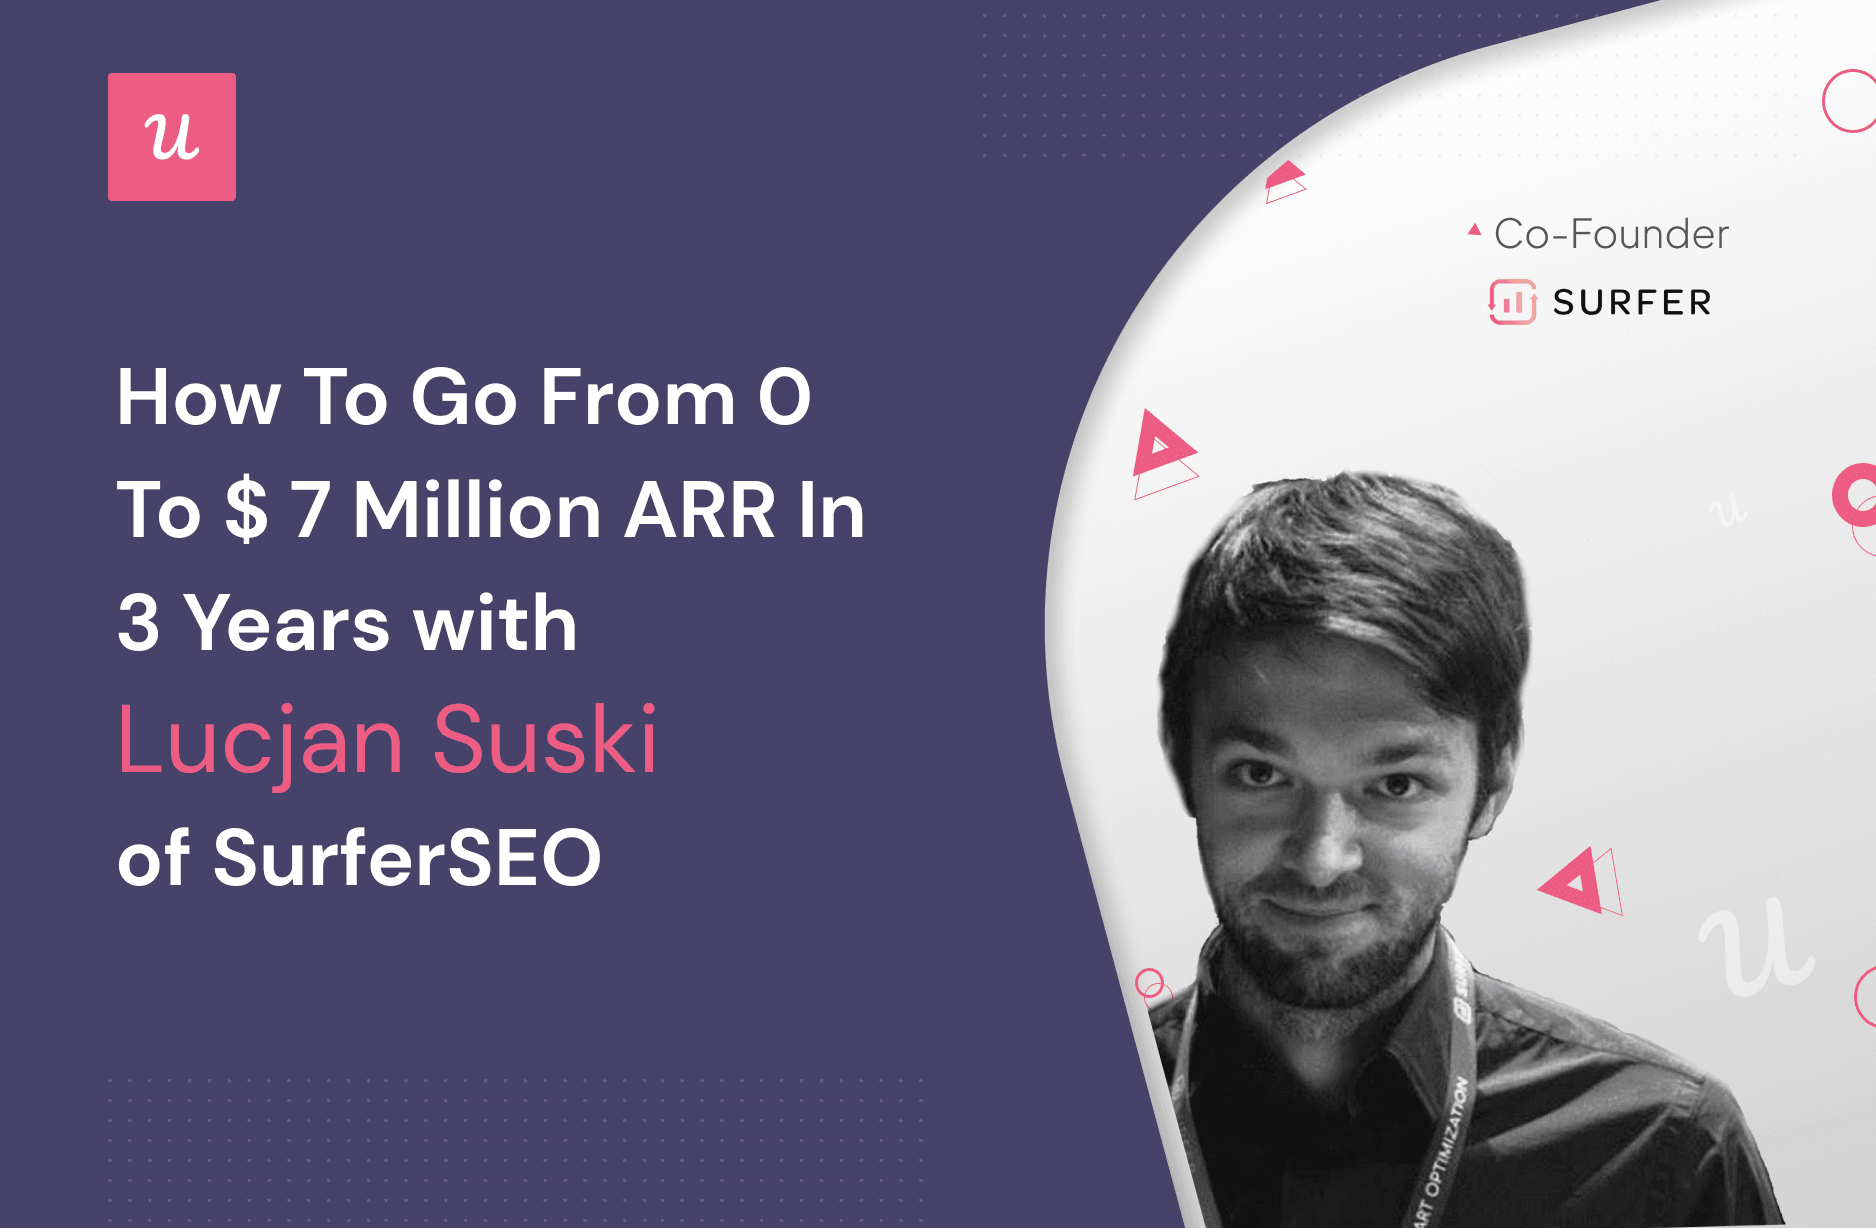 How Lucjan Suski Of SurferSEO went from 0 to $ 7 Million ARR In 3 Years